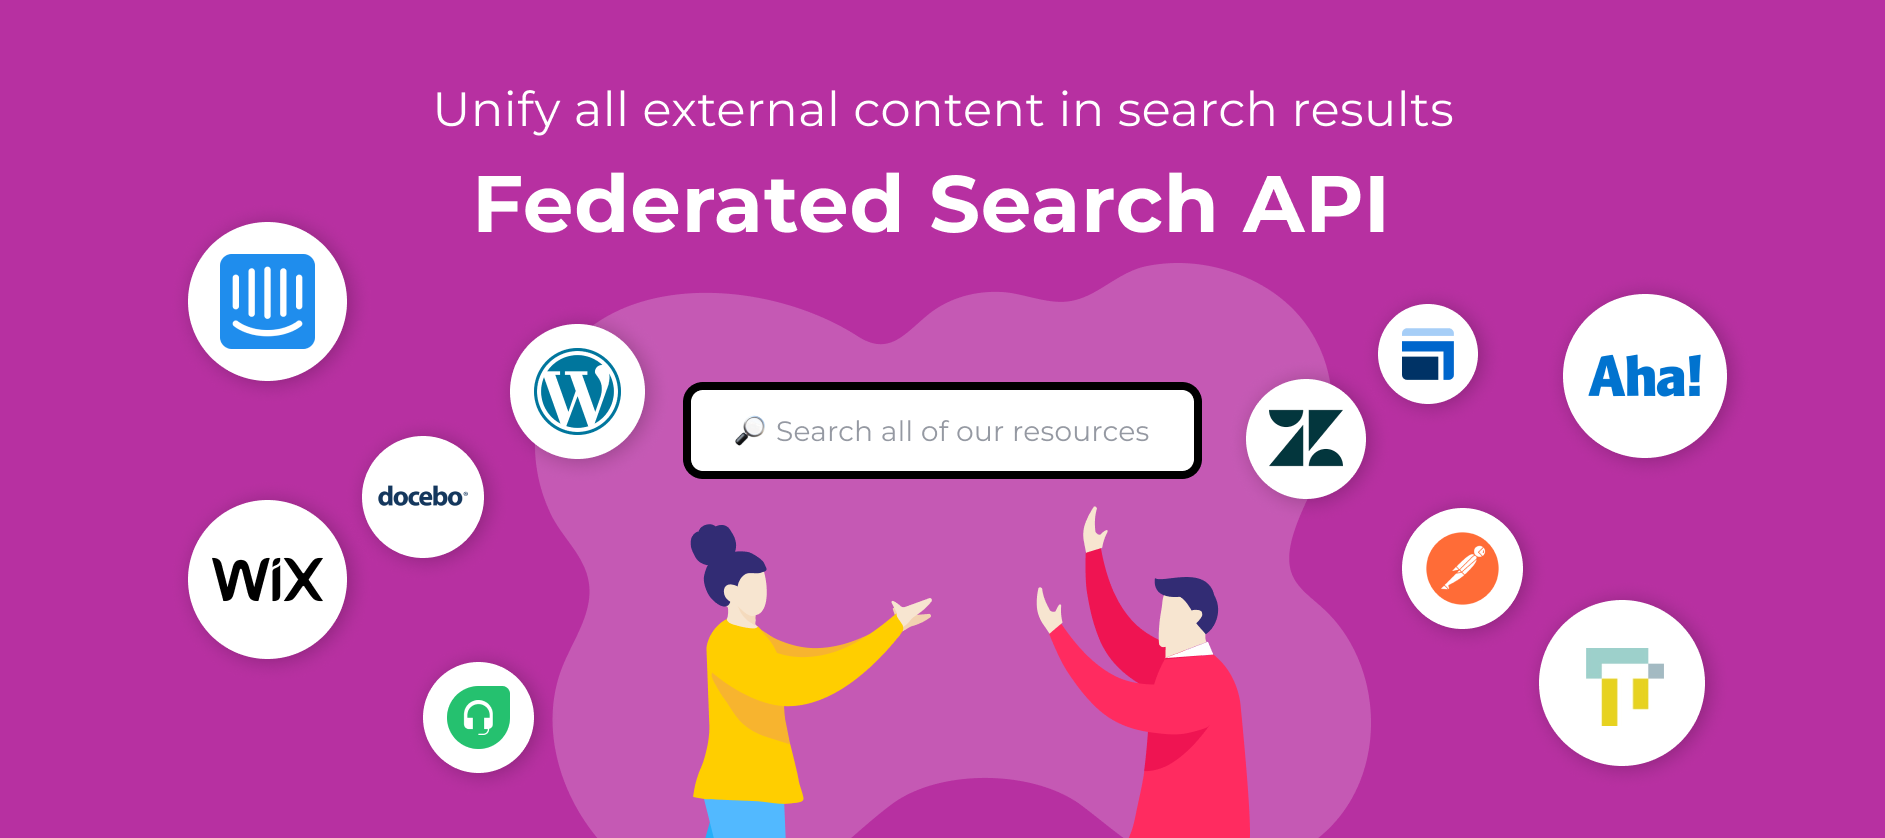 Unify all external content with our Federated Search API